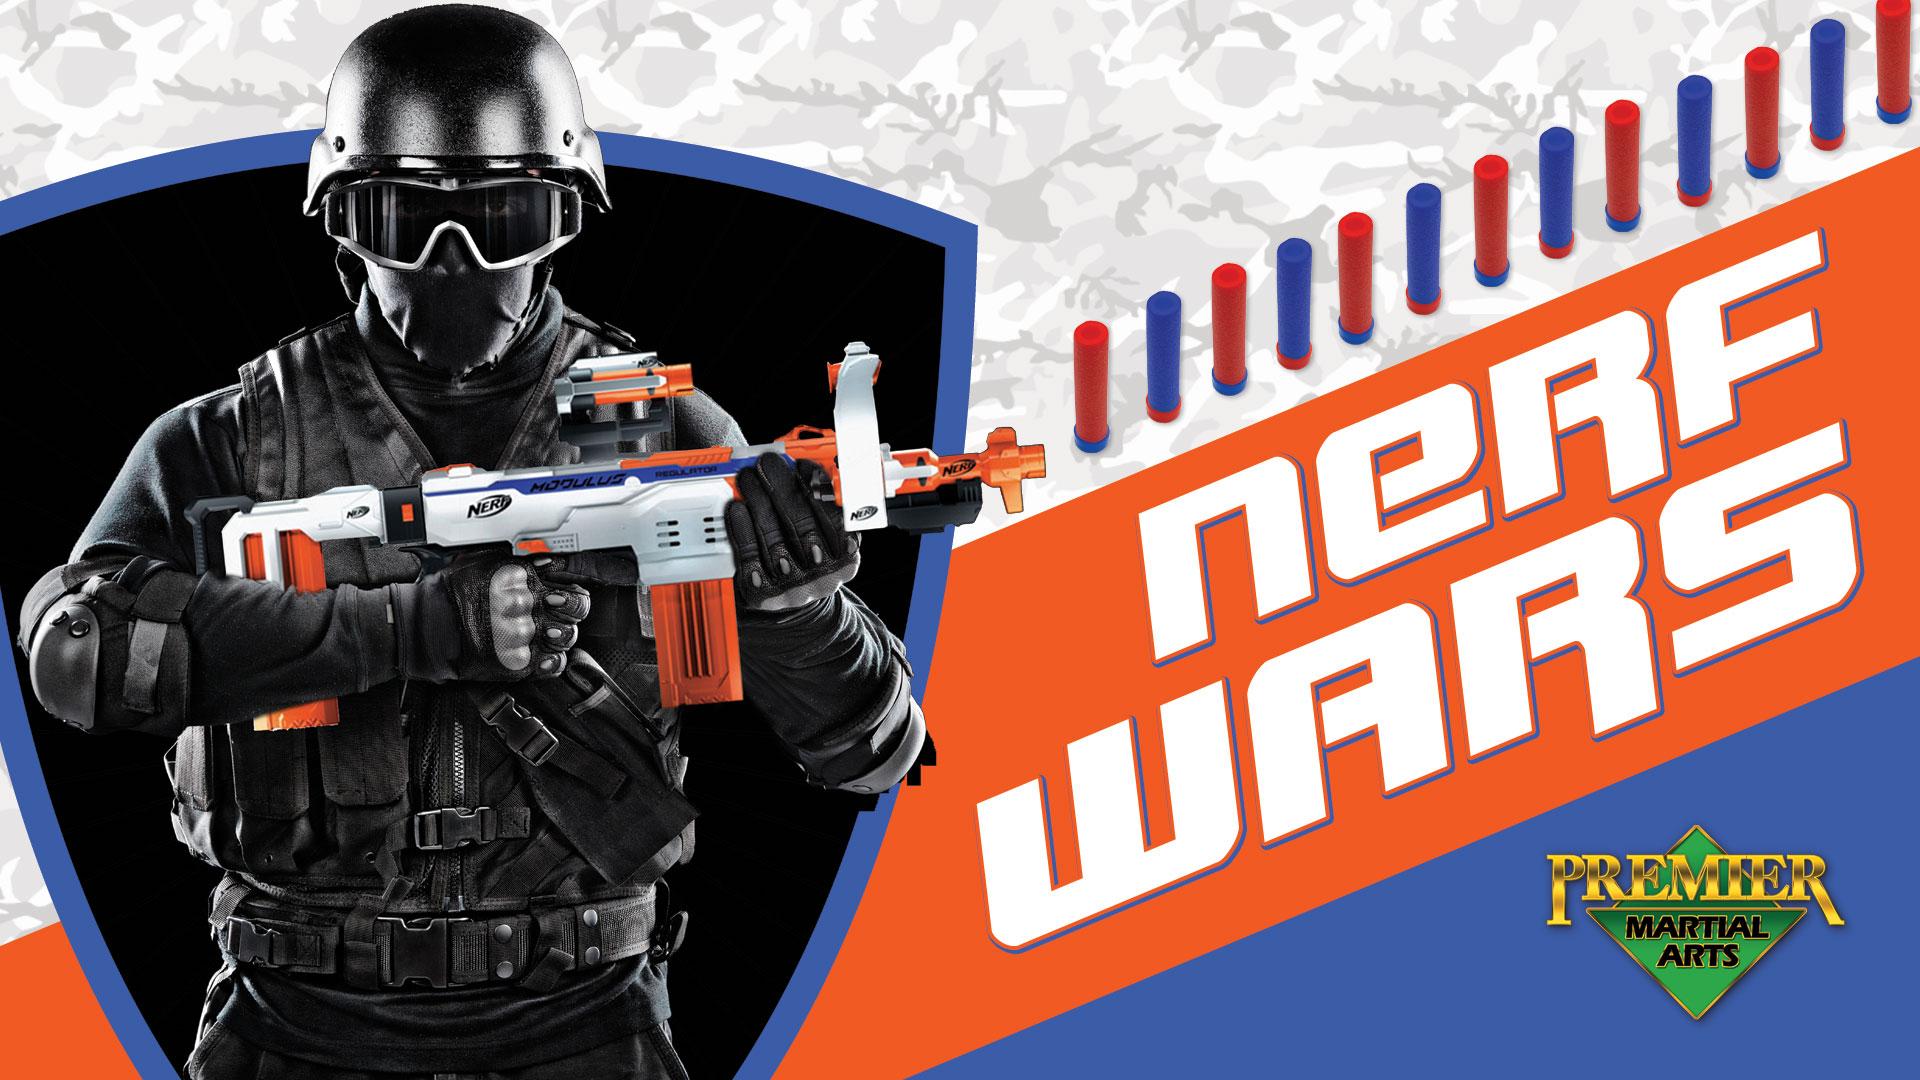 NERF Wars - Parent Night Out Event